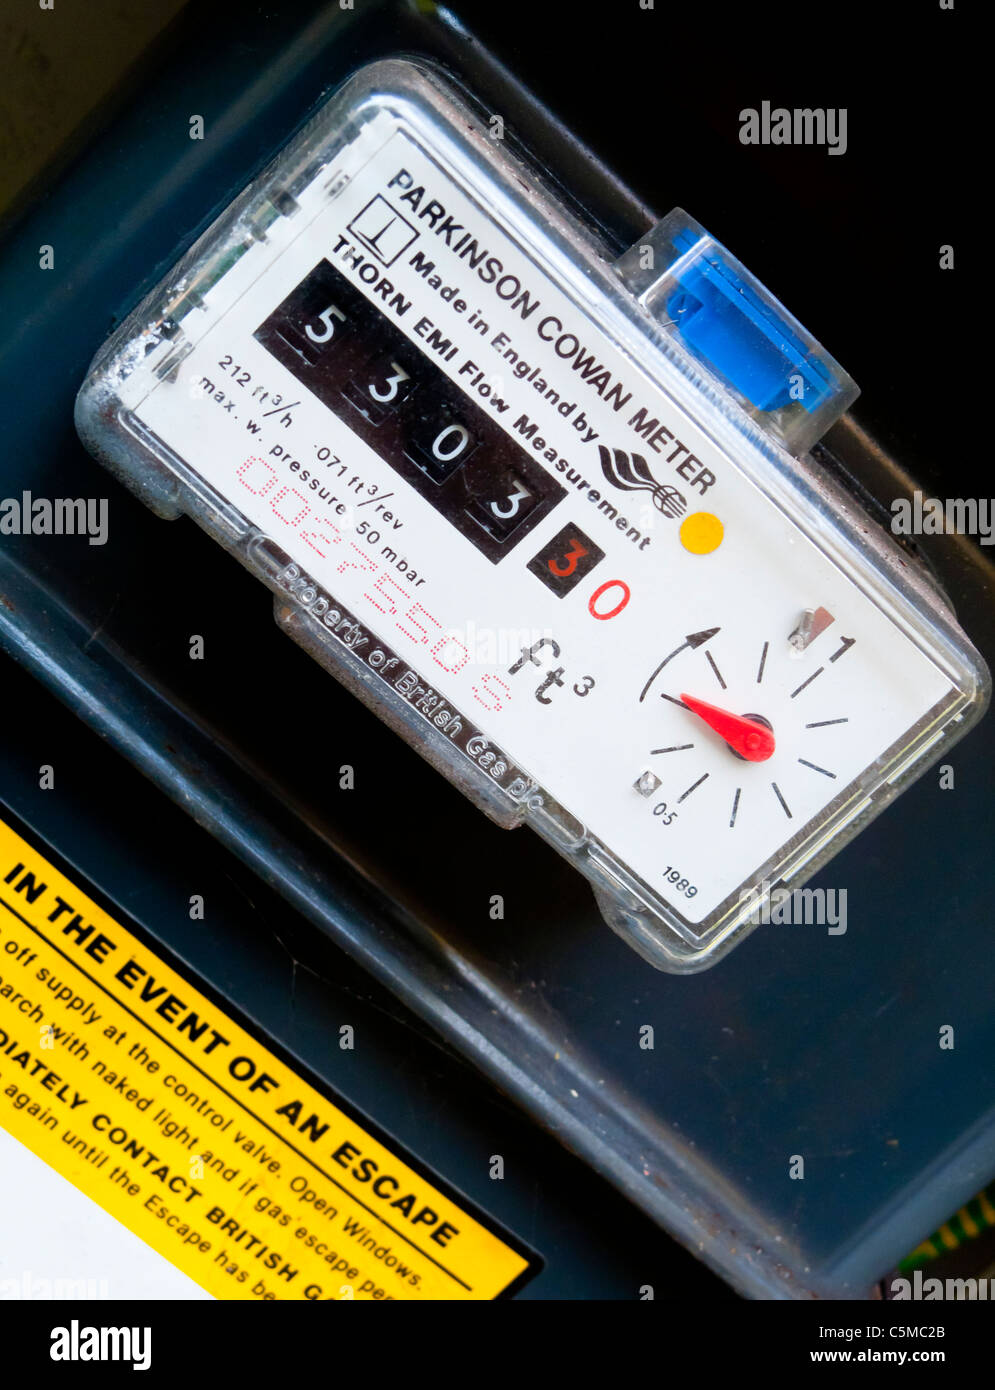 Close up view of domestic gas meter in a UK house showing dials and analogue display used to take readings Stock Photo